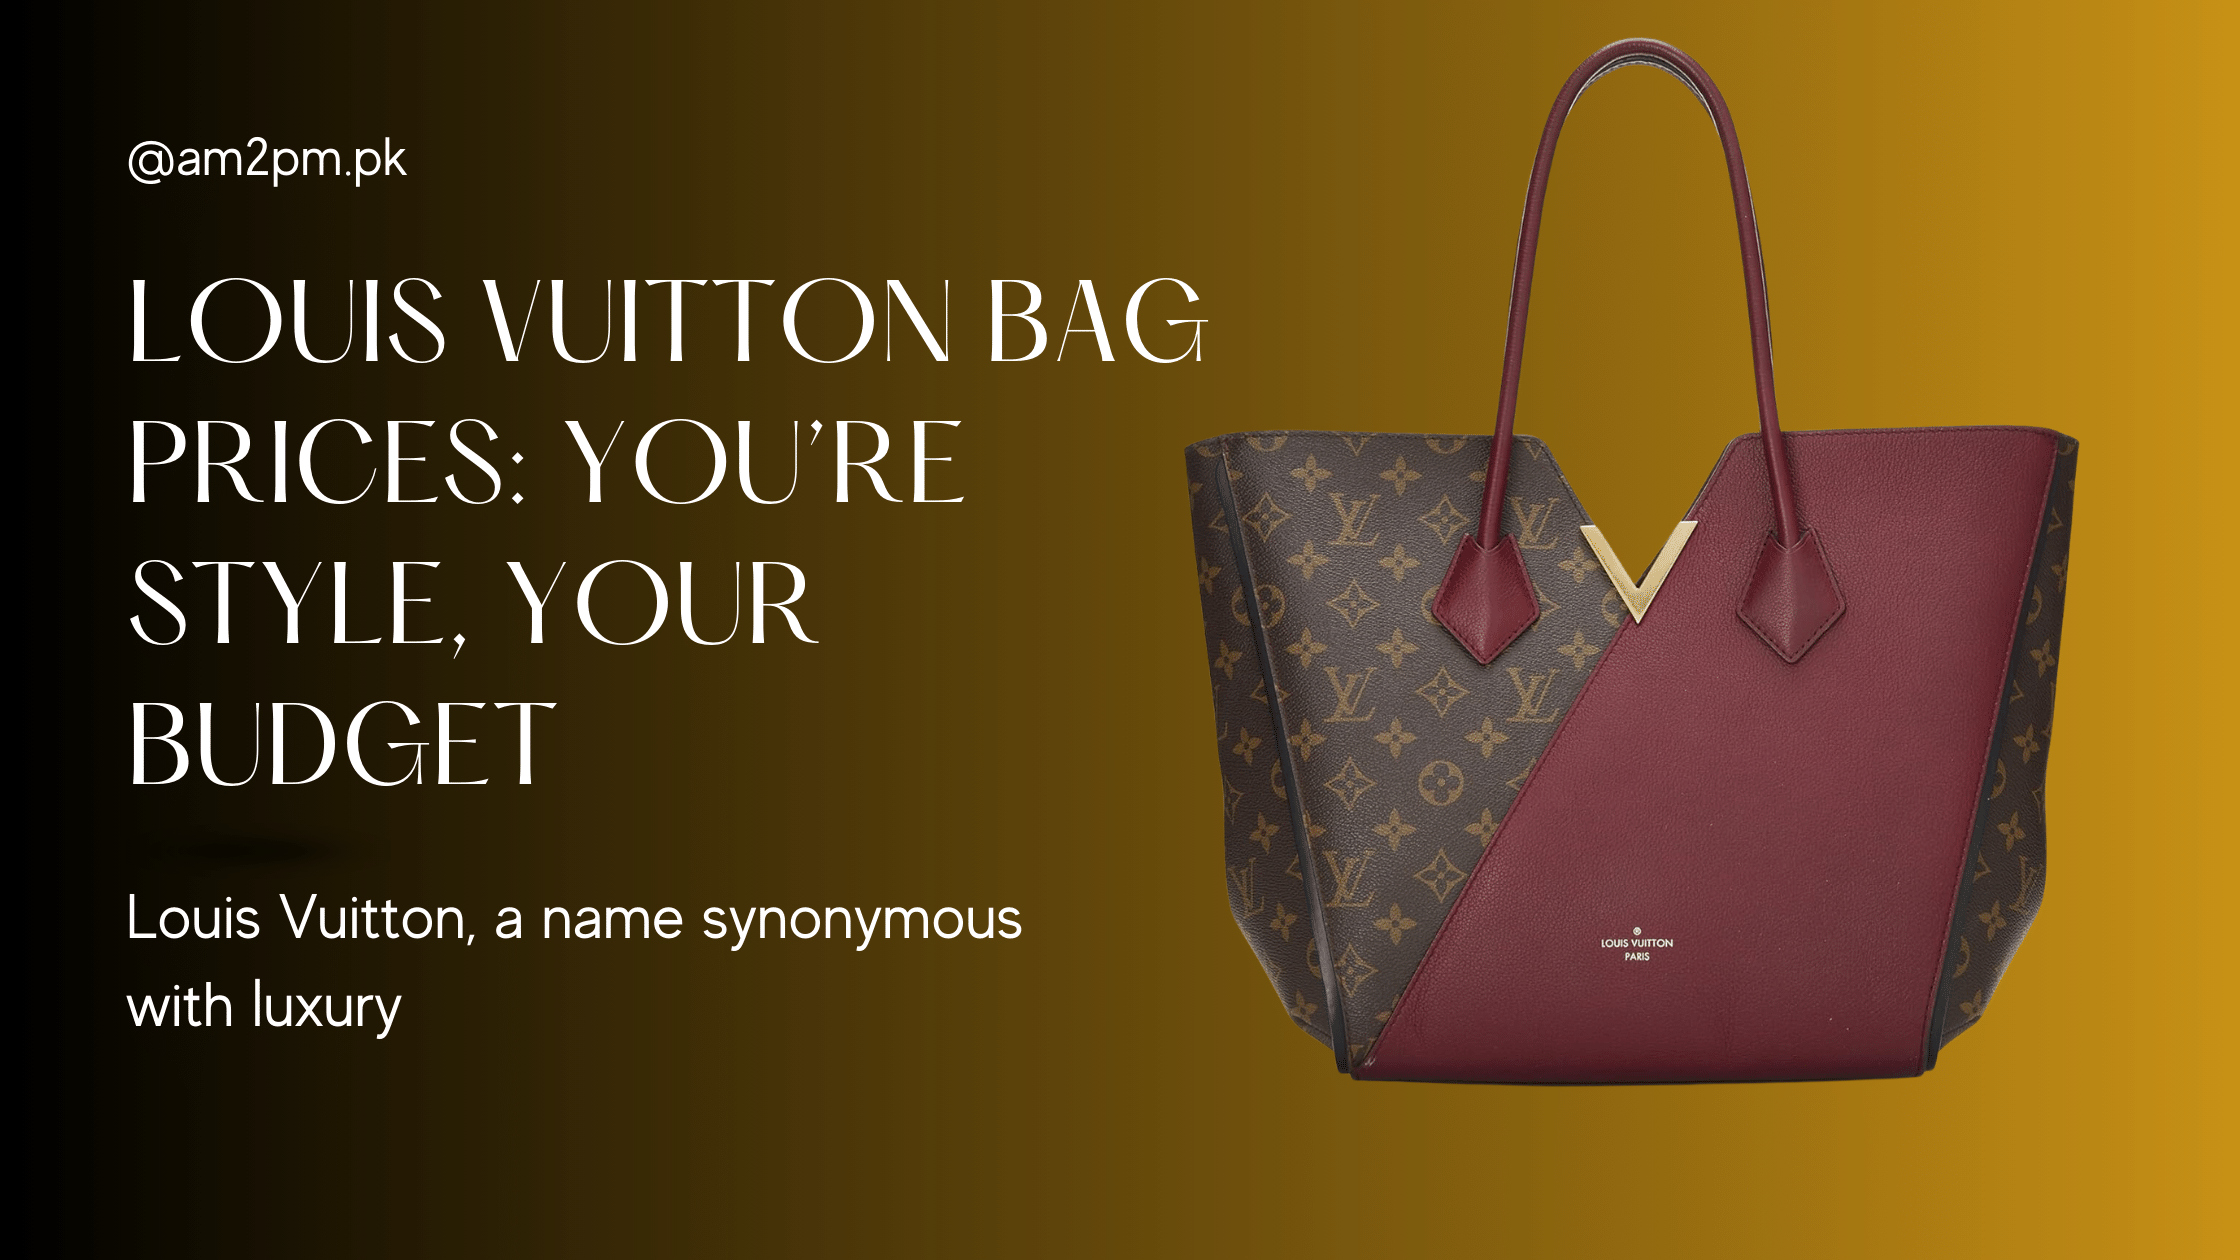 Louis Vuitton Bag Prices: Your Style, Your Budget